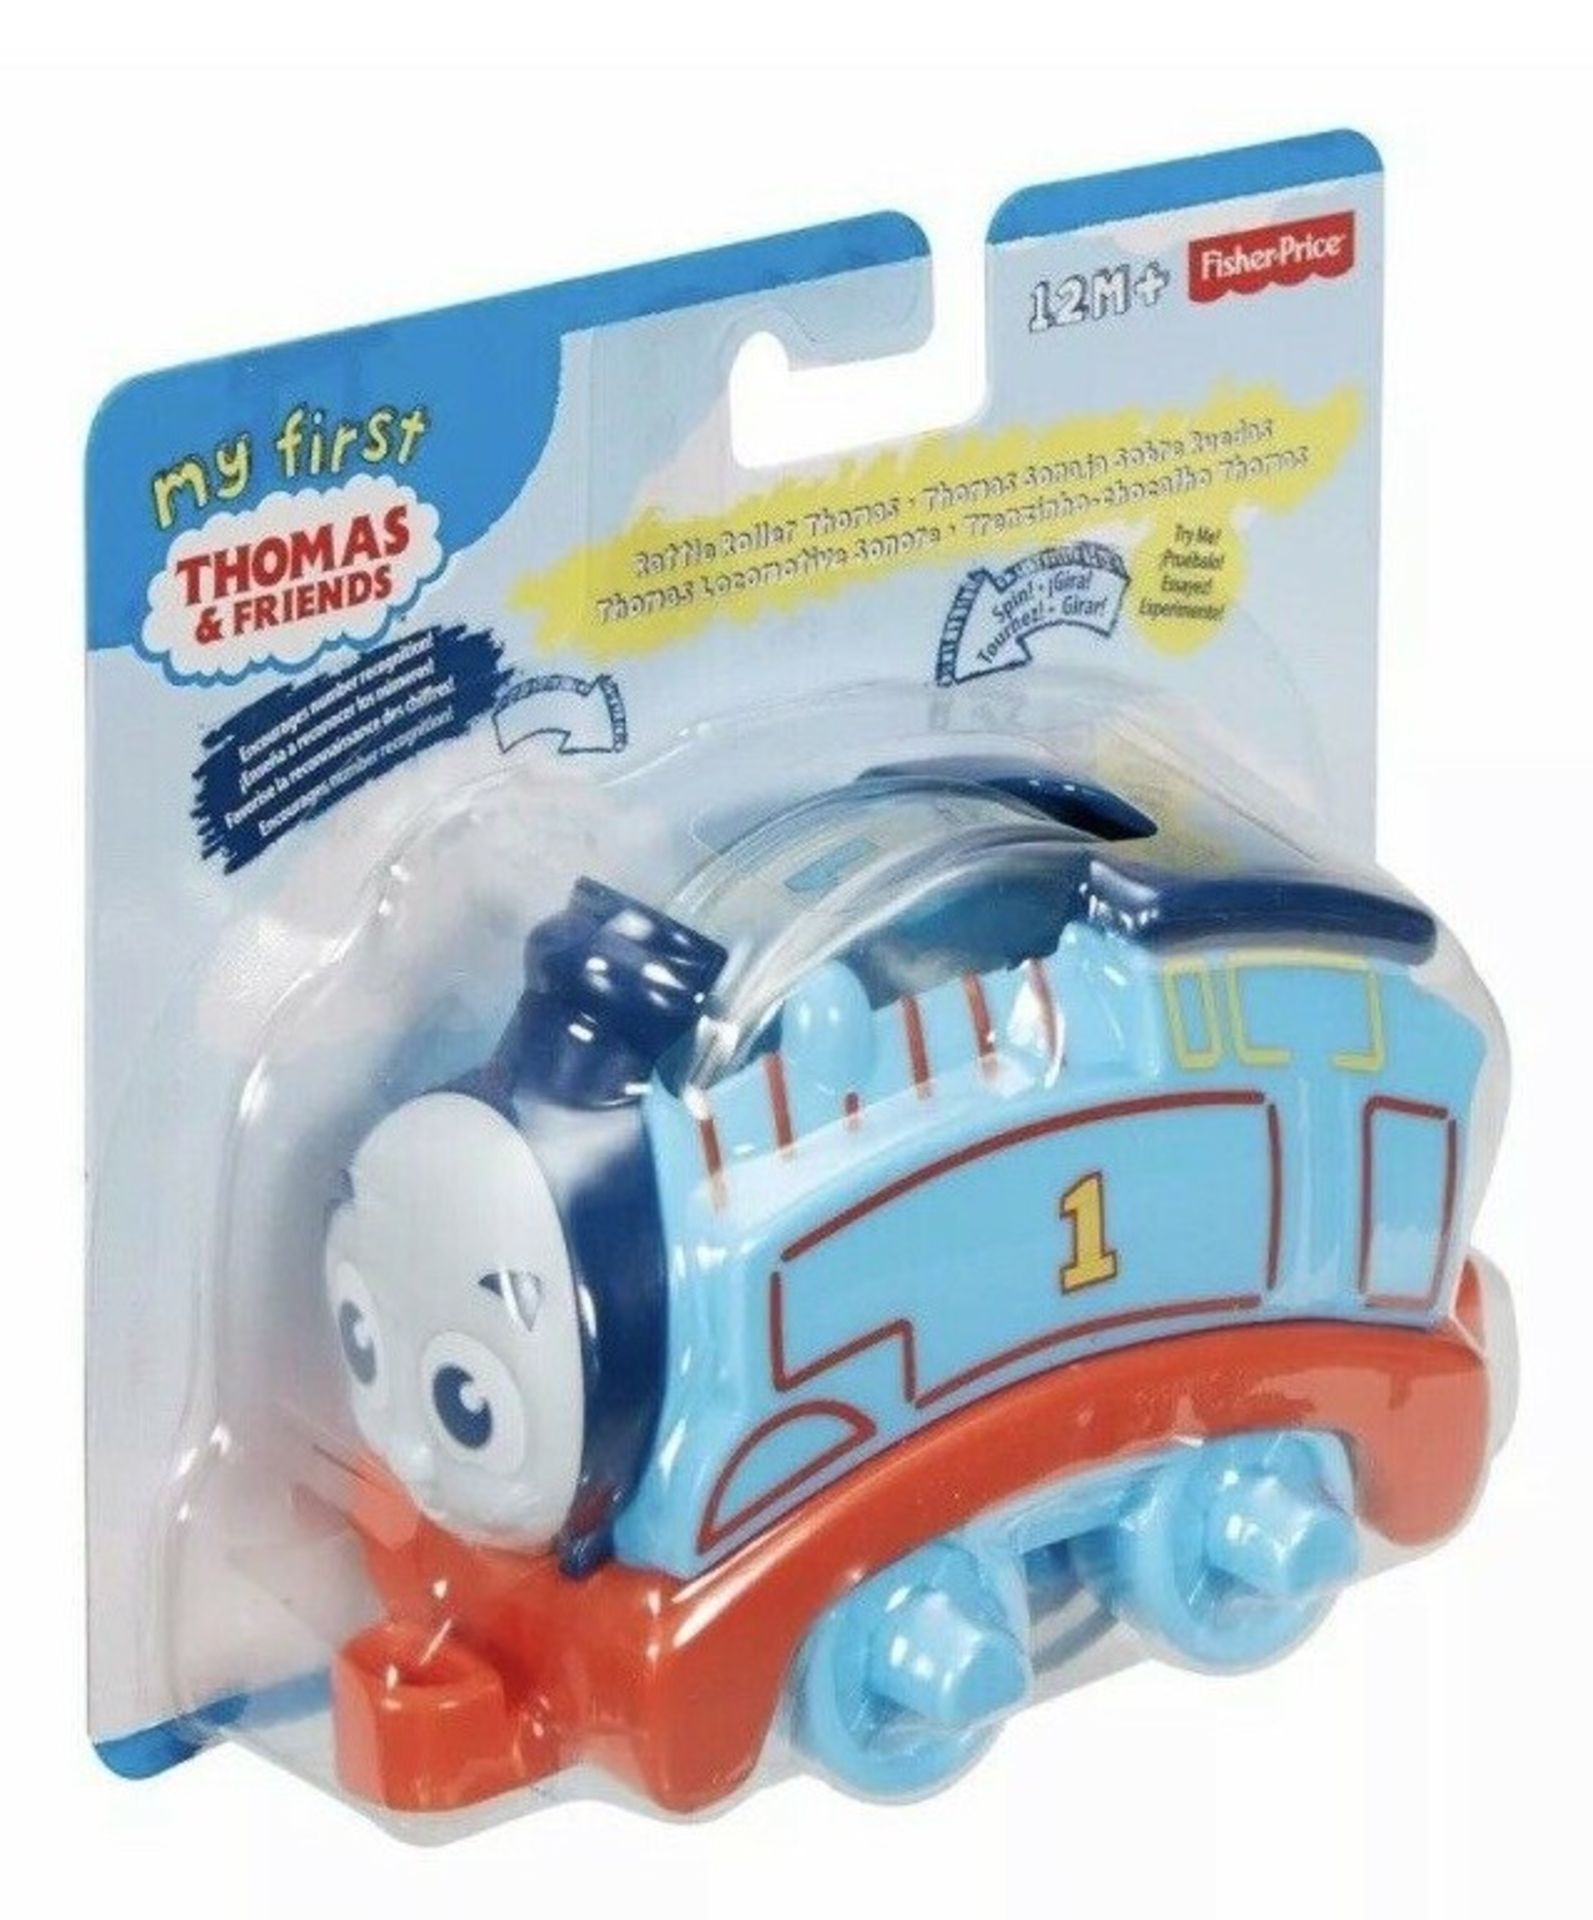 6 X My First Thomas and Friends Rattle Roller Thomas - Image 2 of 3